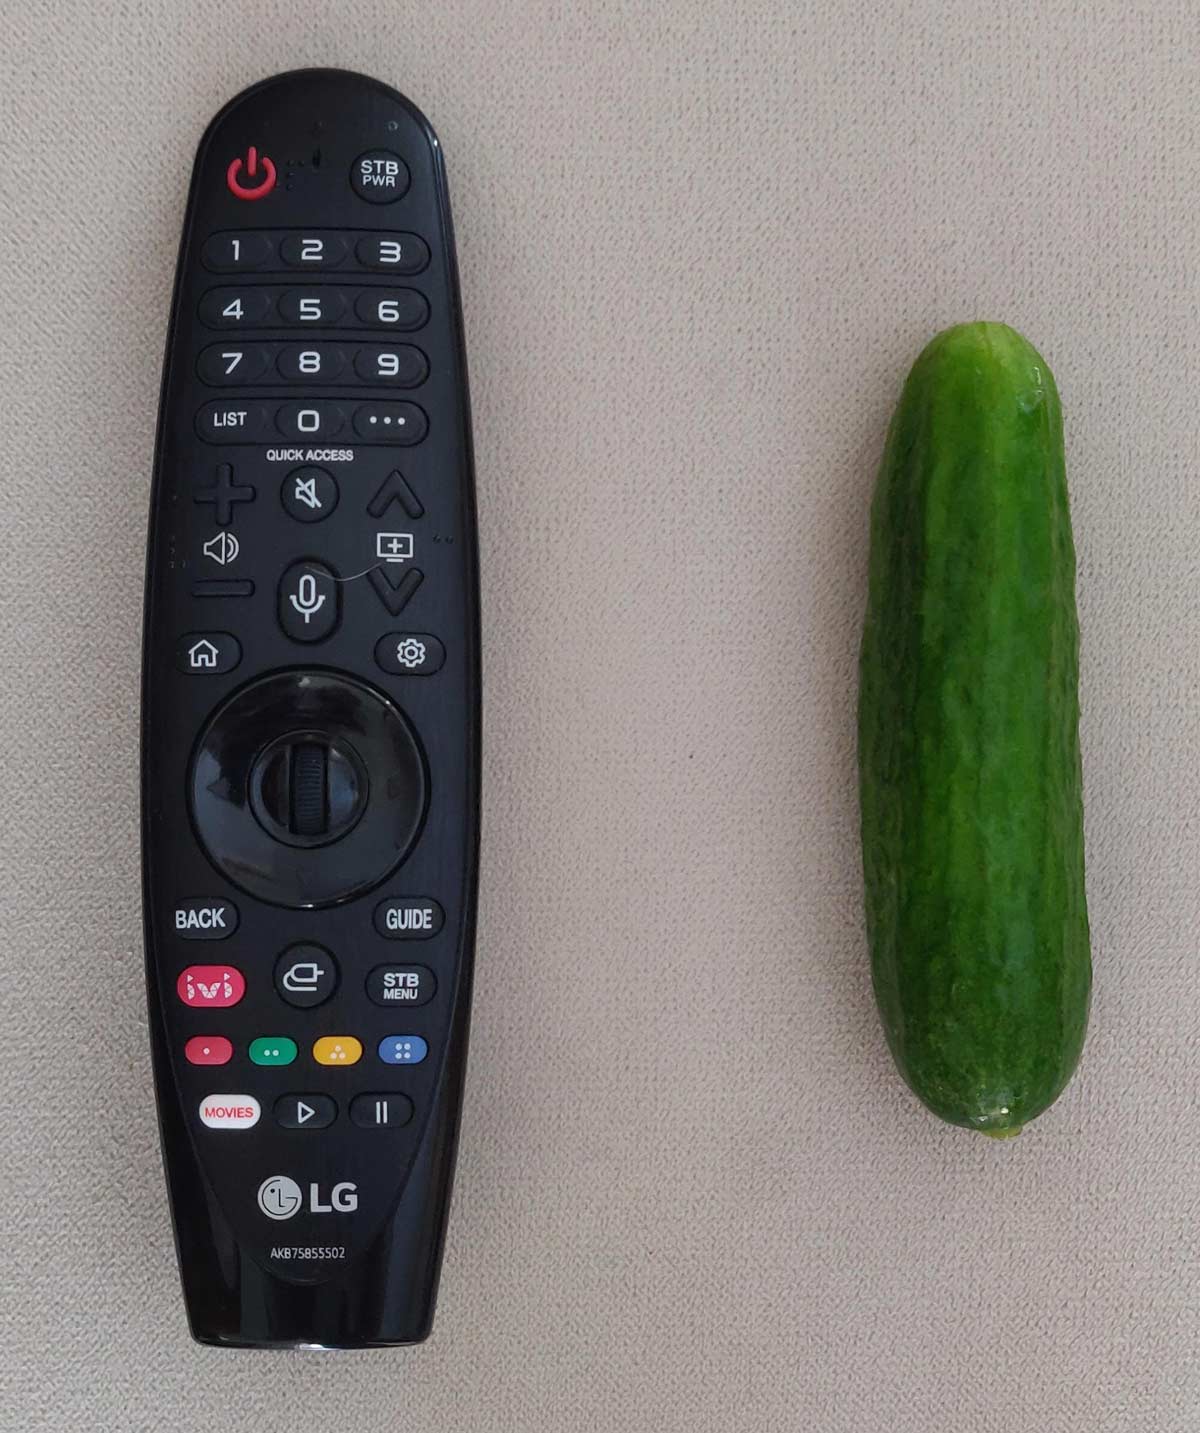 My wife asked me to buy medium sized cucumbers. This is what I bought, she said it's small... (TV remote for scale)